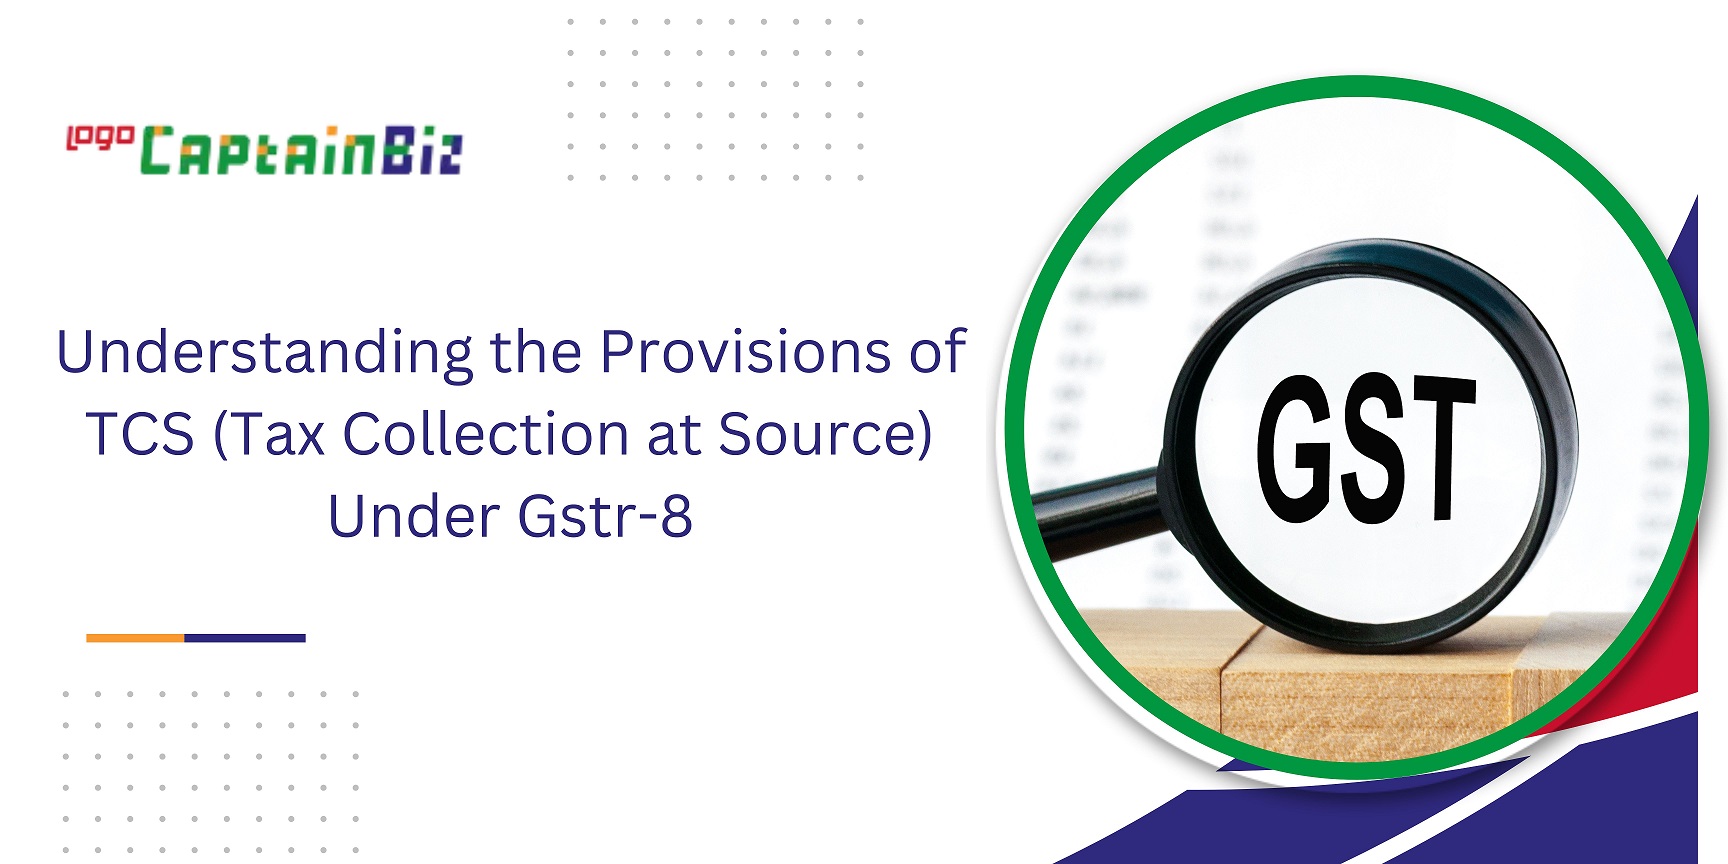 CaptainBiz: Understanding the Provisions of TCS (Tax Collection at Source) Under Gstr-8